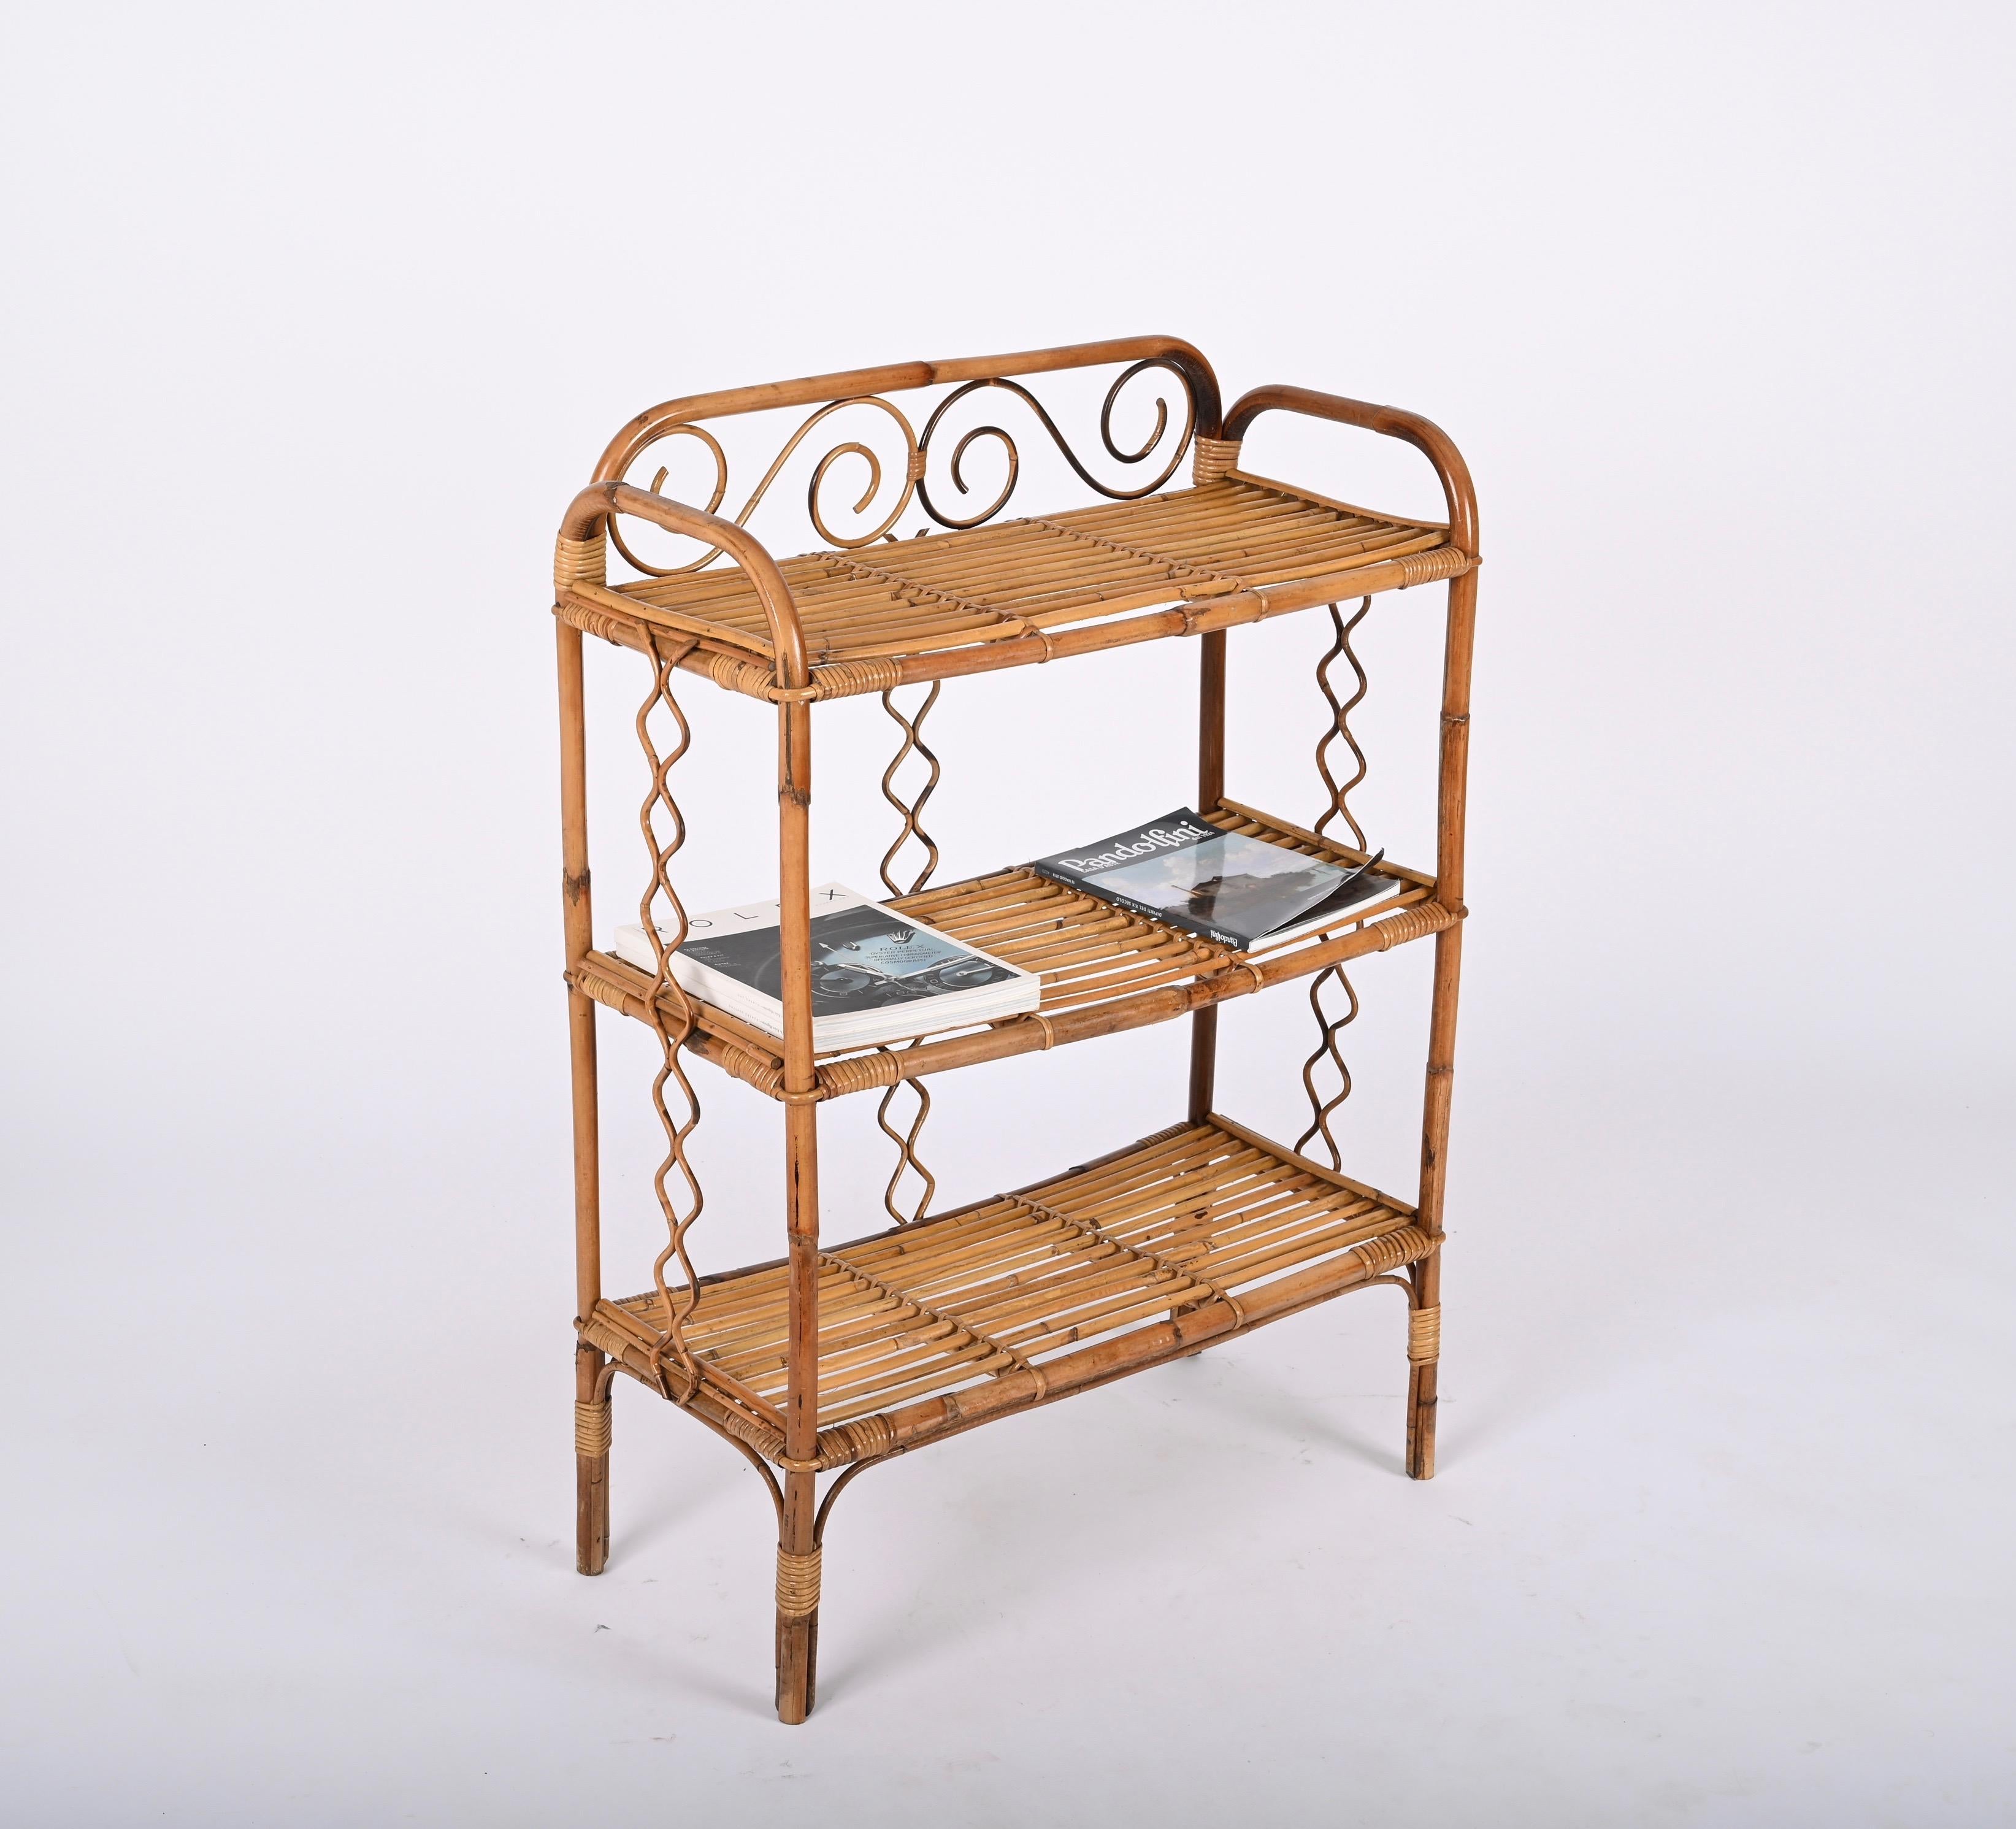 Midcentury Étagère Bamboo and Rattan, Italian Bookcase with Three Shelves, 1970s For Sale 7